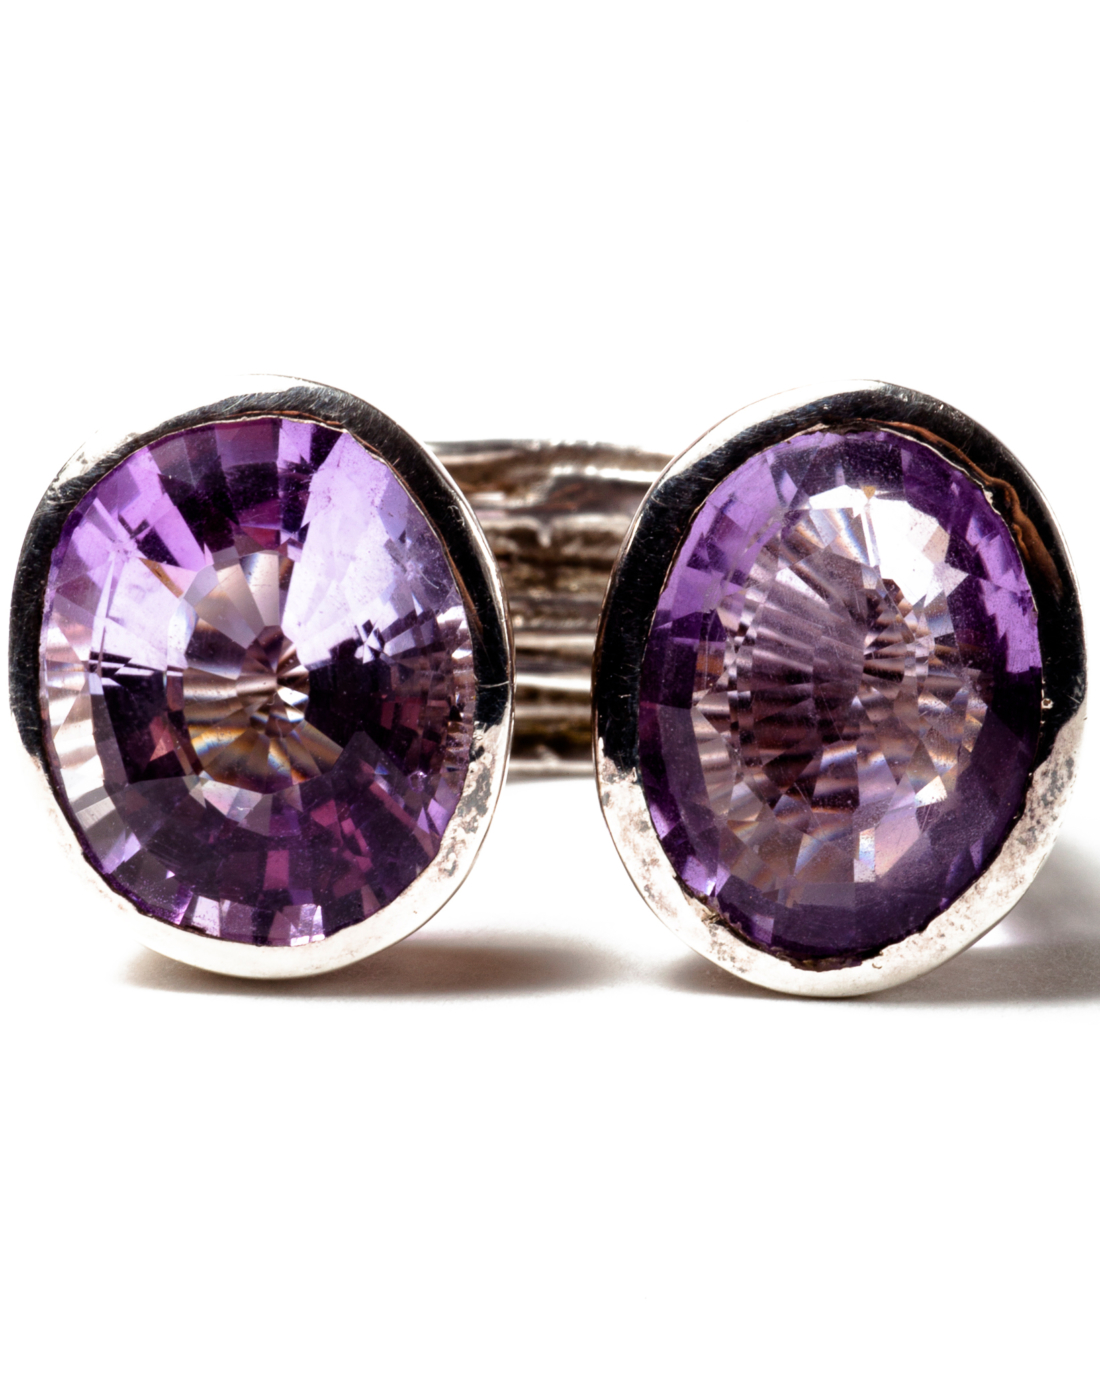 Double the Amethyst on the Sterling Silver Rocks Ring, circa 1990’s